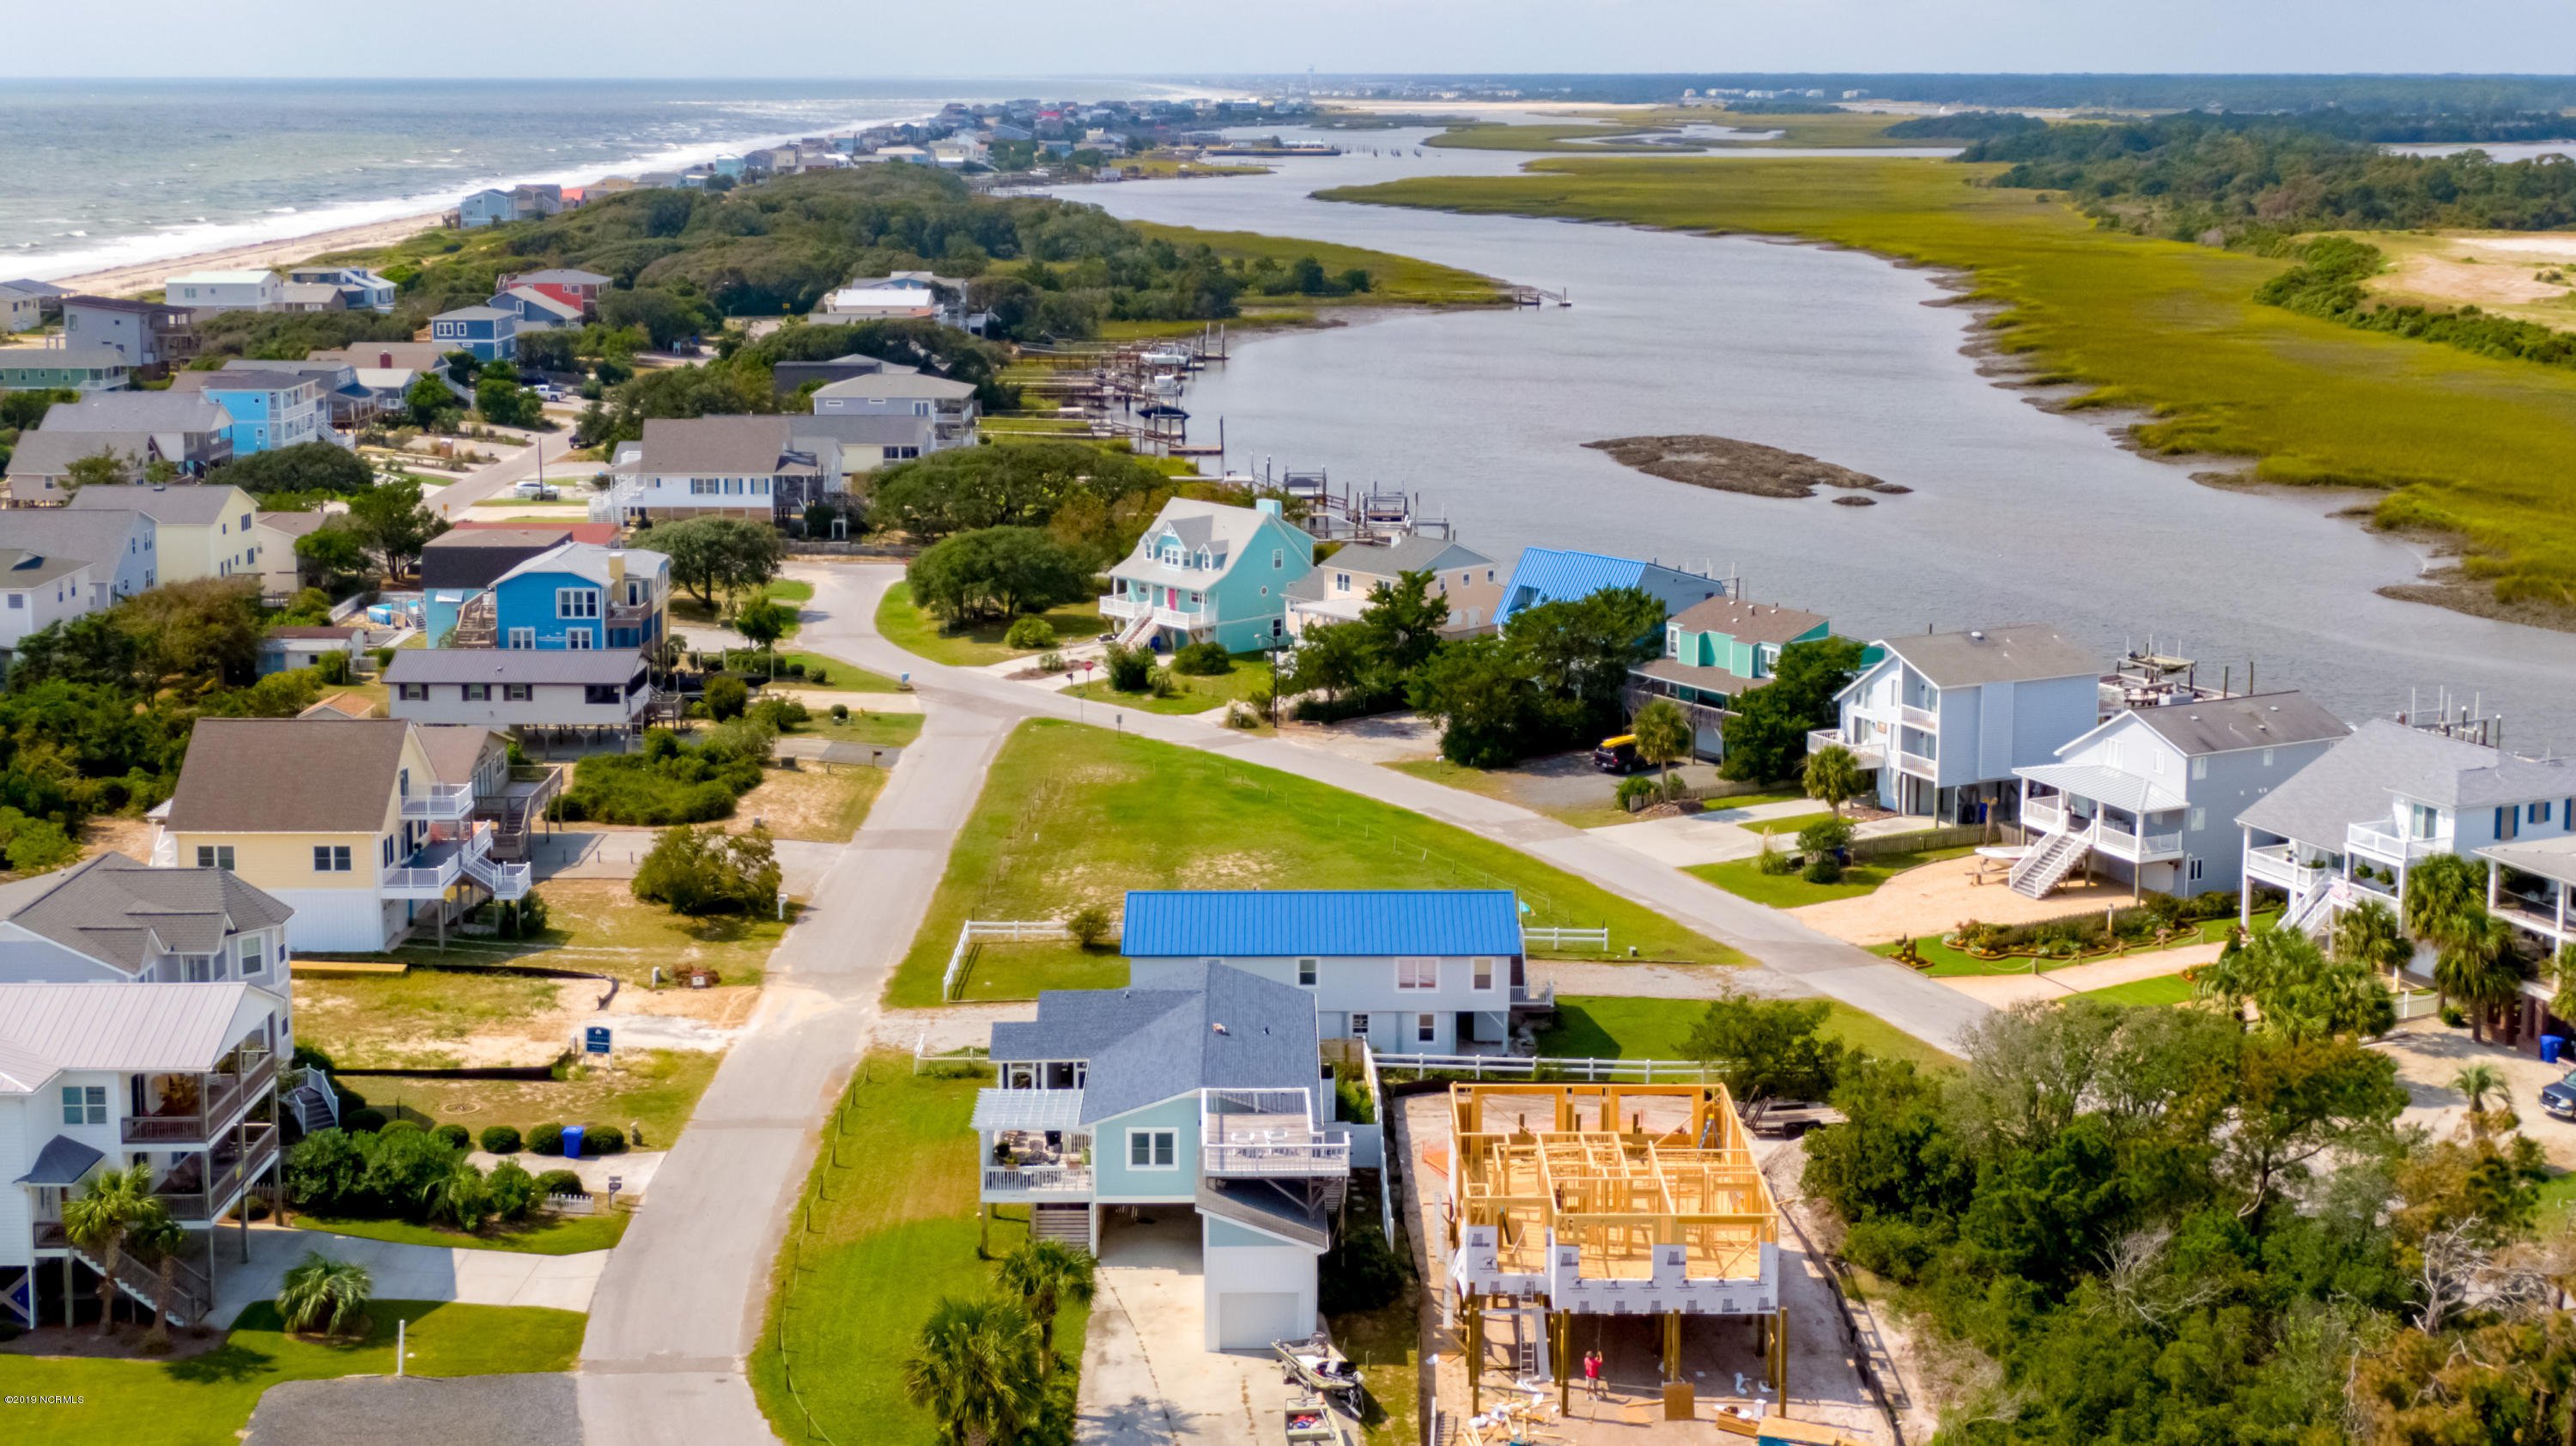 Lowes Oak Island Nc In oak island there are a lot of